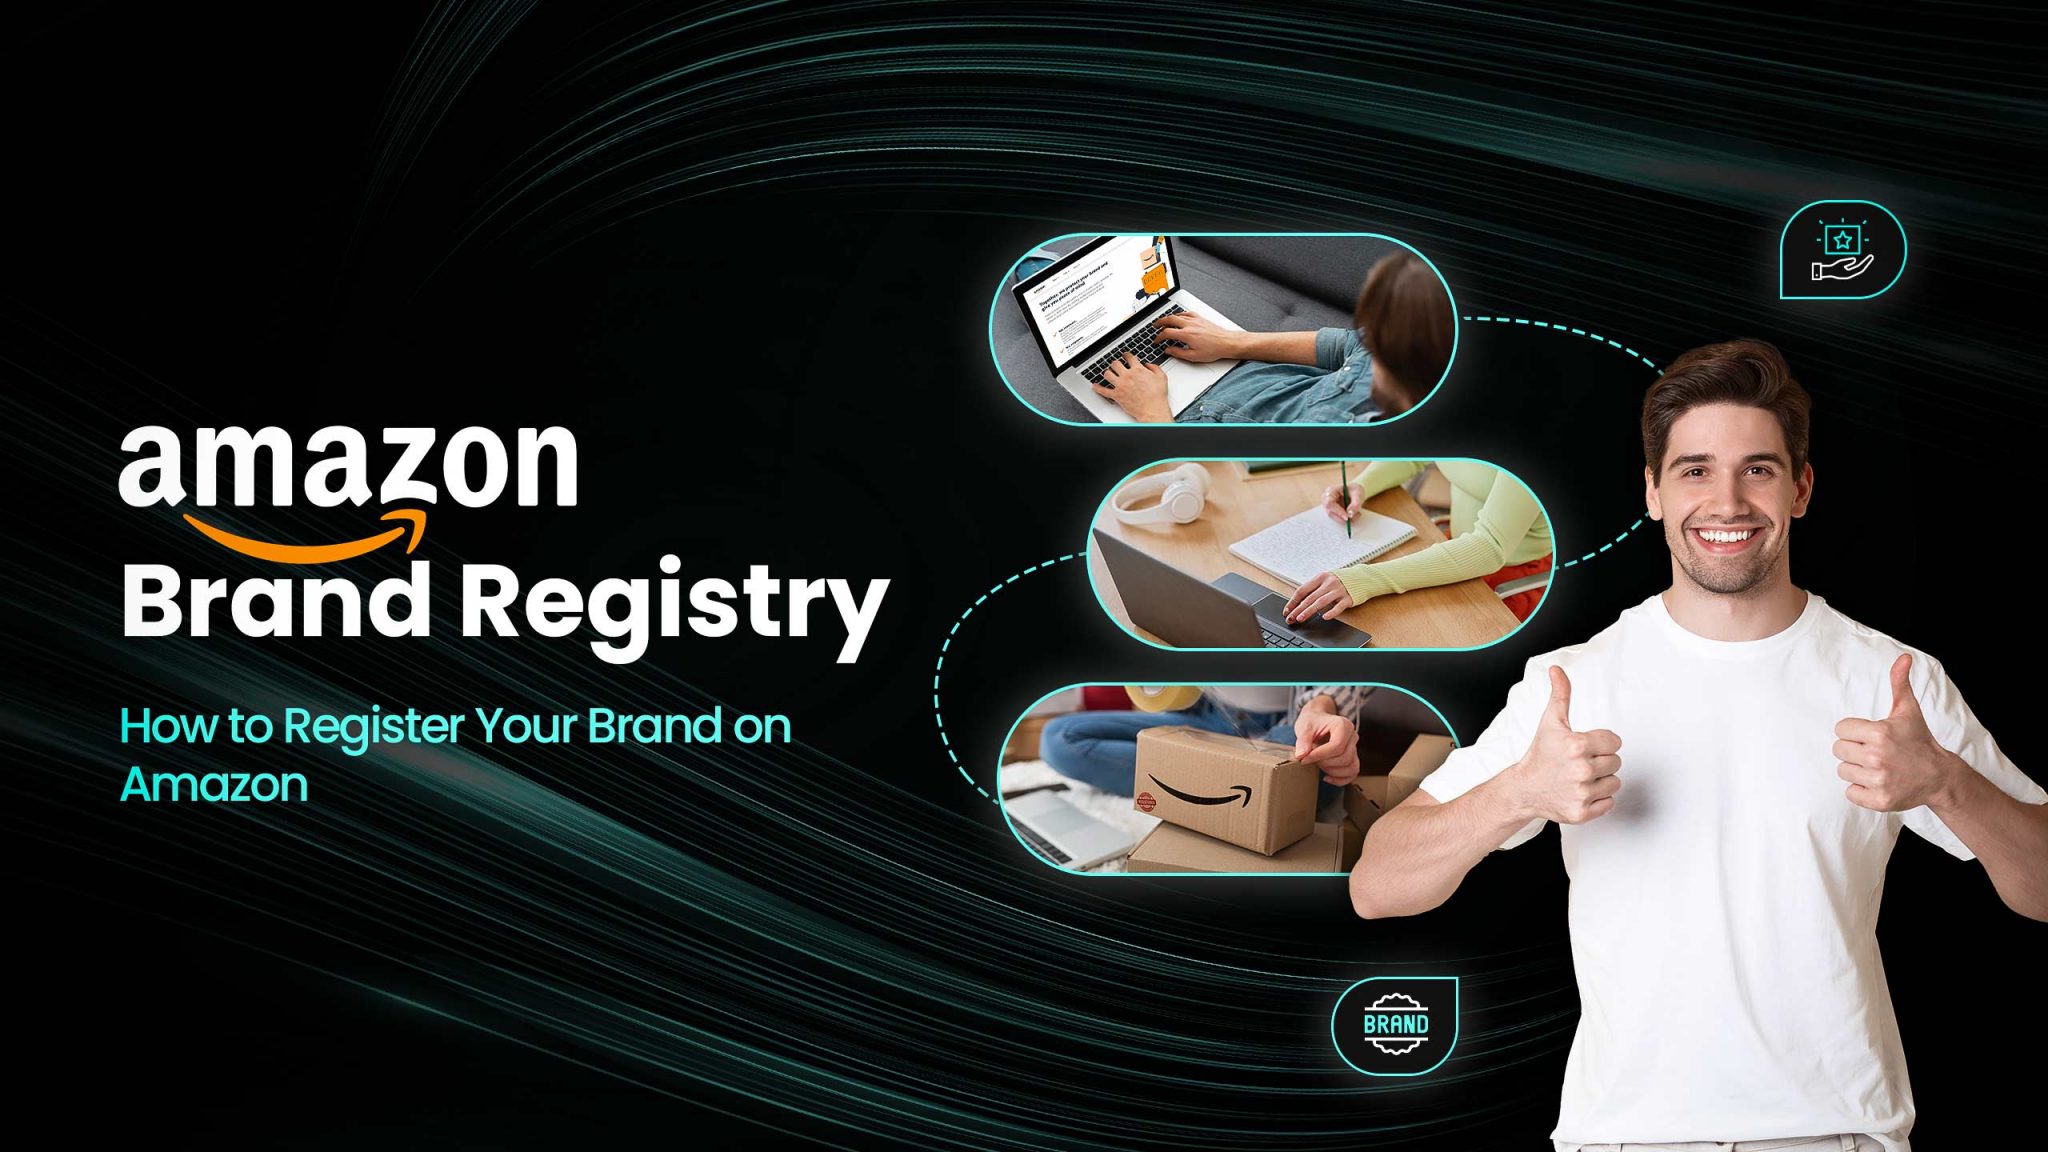 Amazon Brand Registry How to Register Your Brand on Amazon